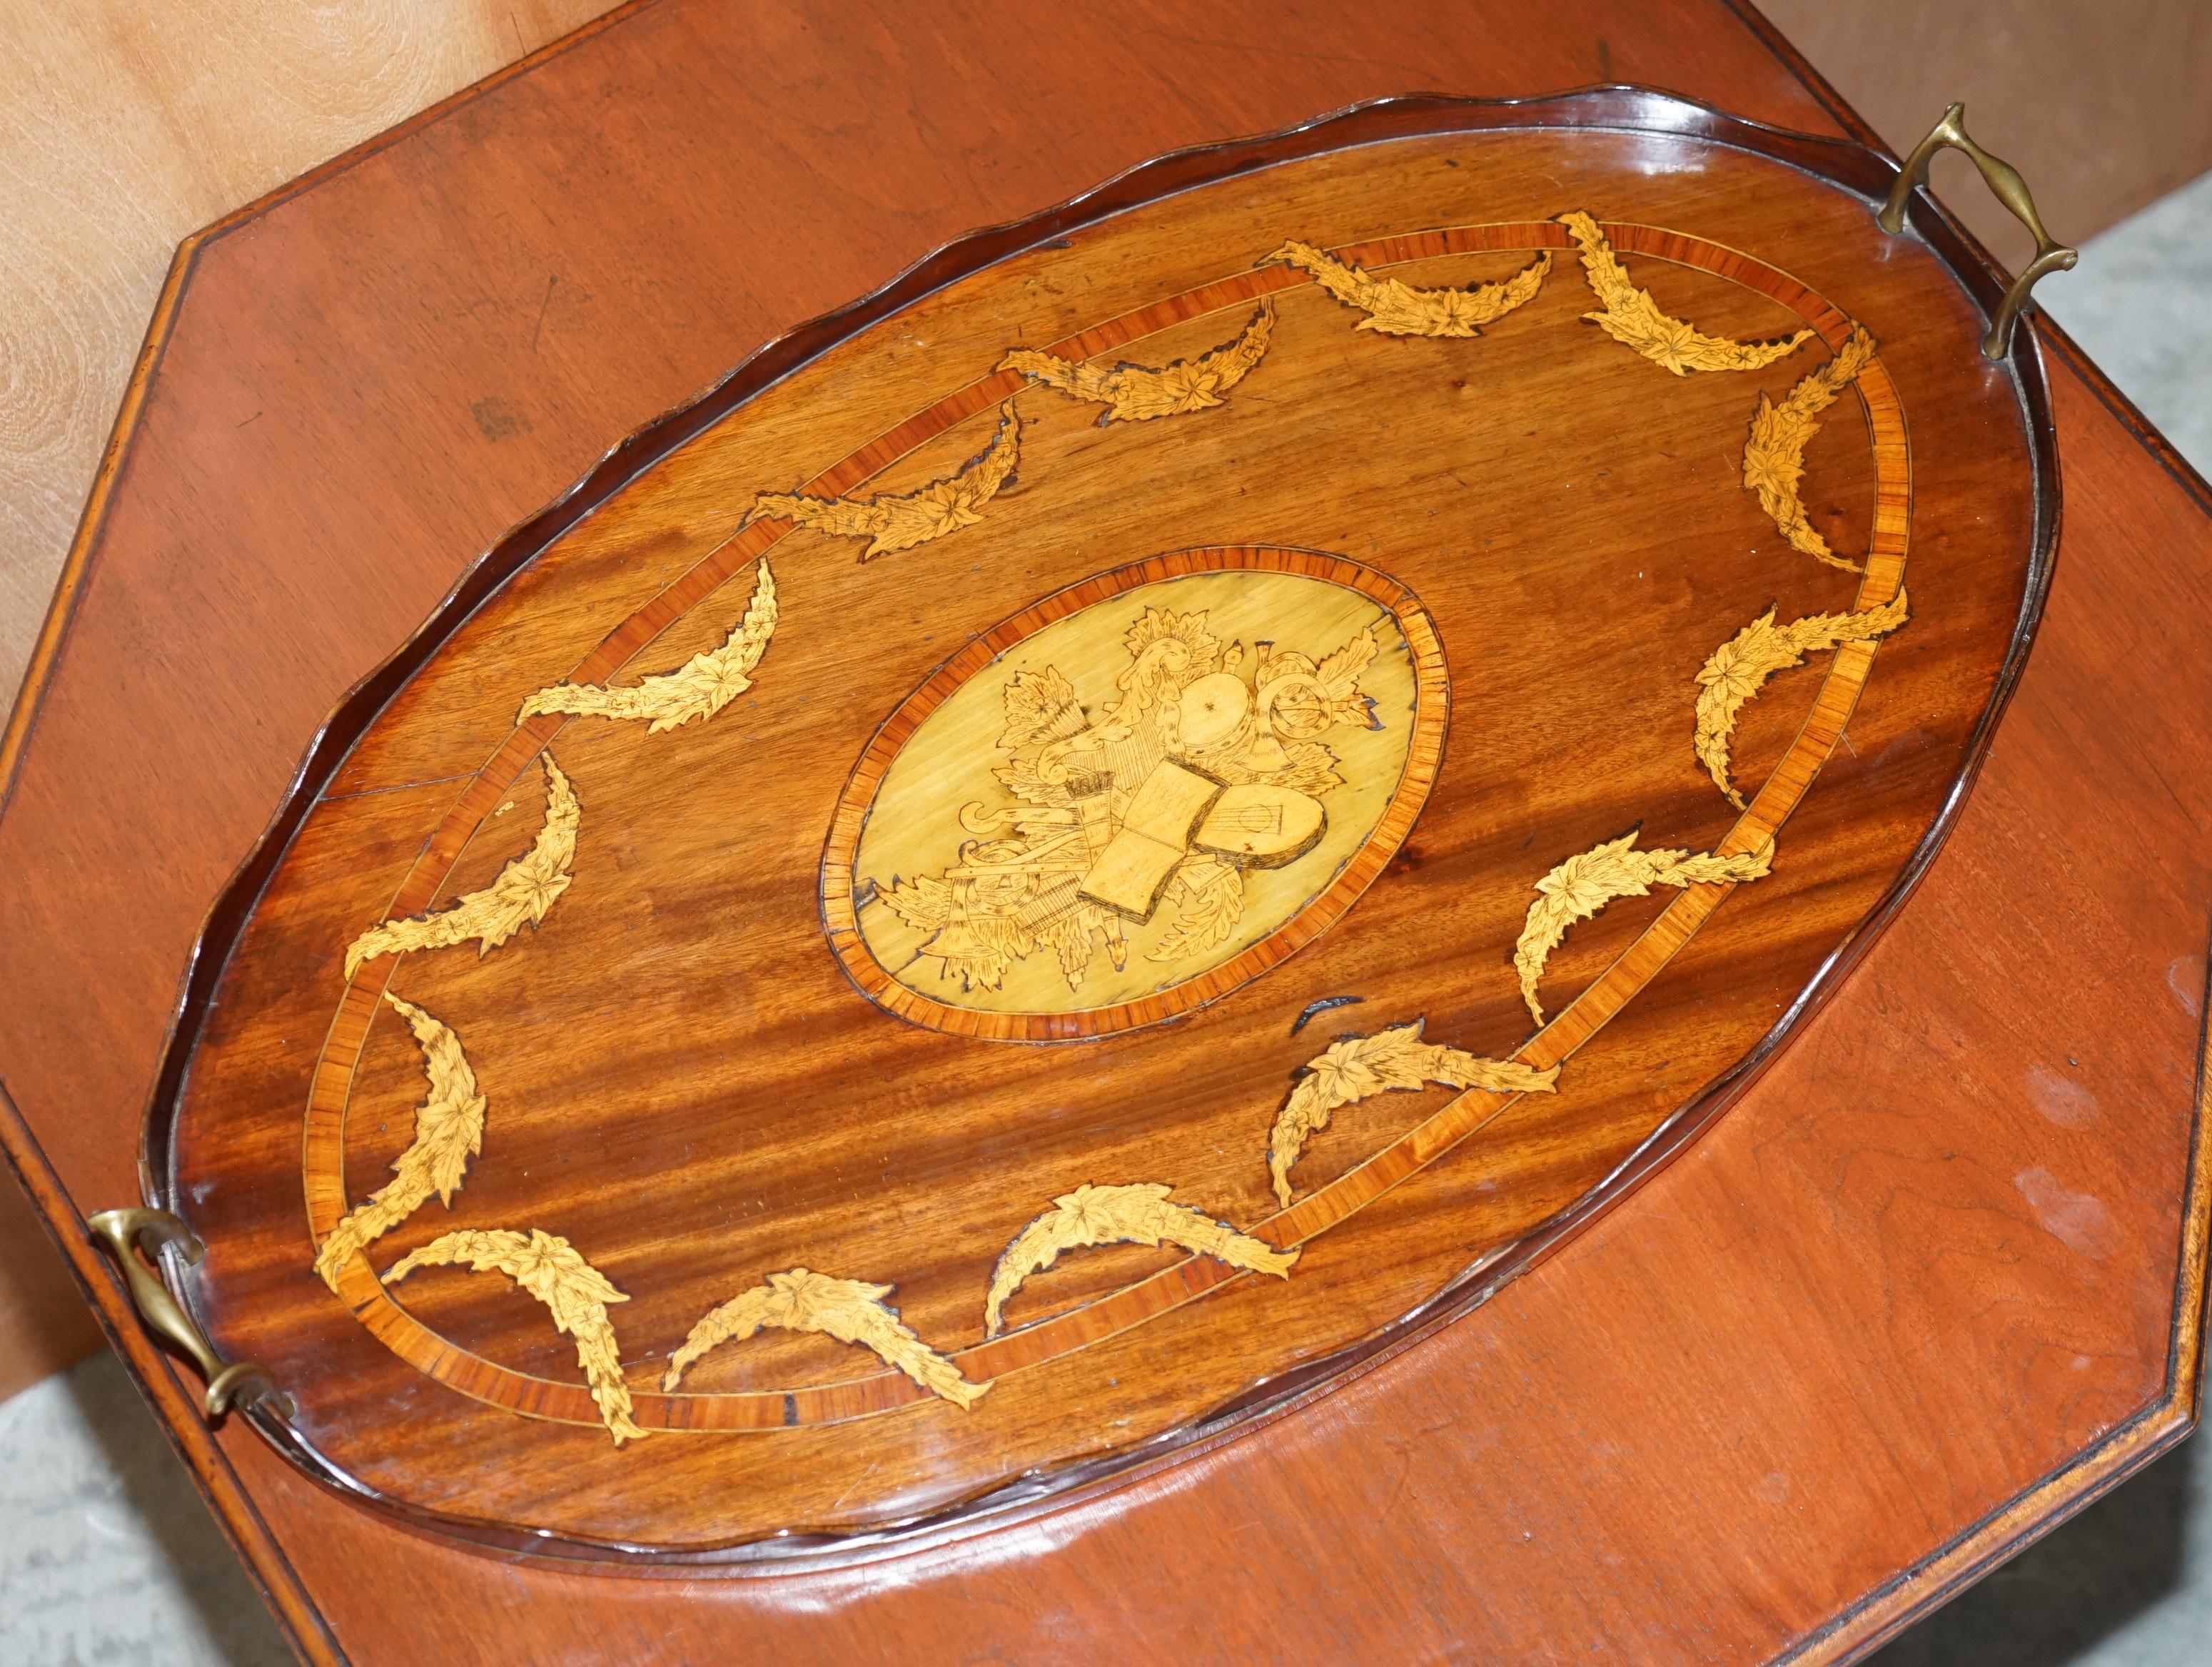 We are delighted to offer this exquisite very well made original Victorian walnut Sheraton inlaid large butlers serving tray with bronze handles after the works of the genius that was Alfred Beurdeley

This is a pretty much the finest example of